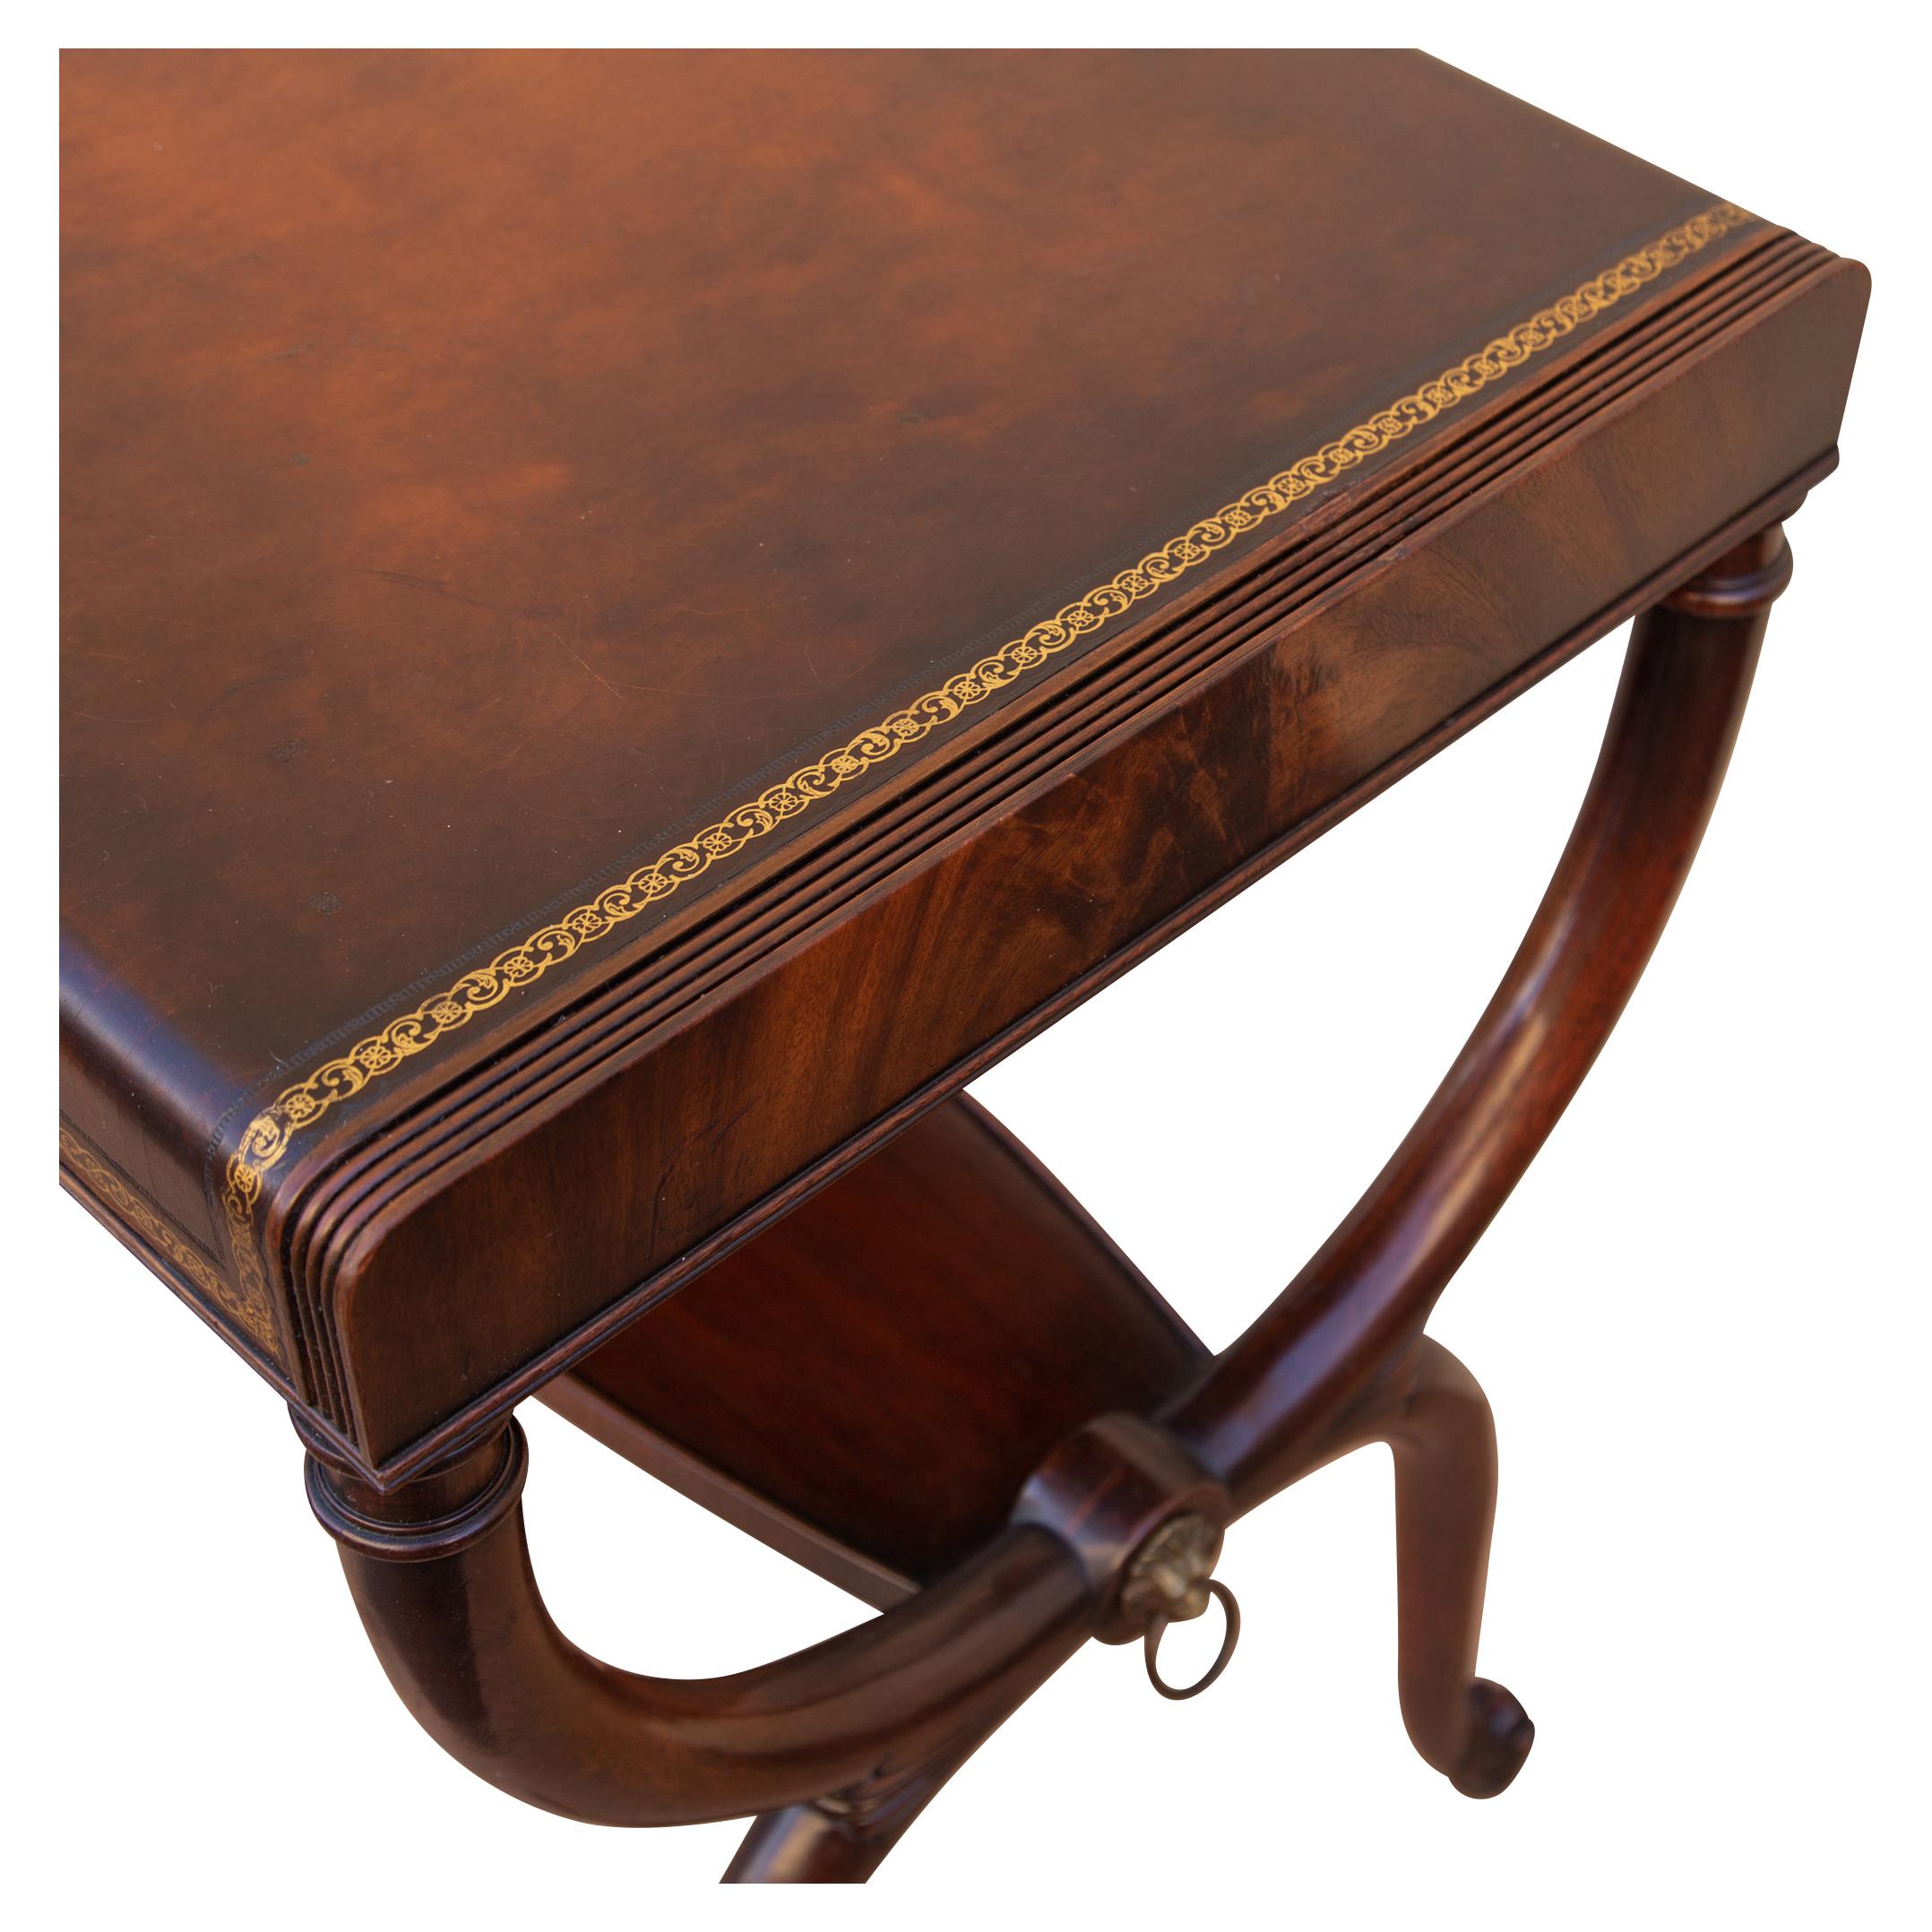 20th Century Regency Leather Top Mahogany Side Table with Curule Legs